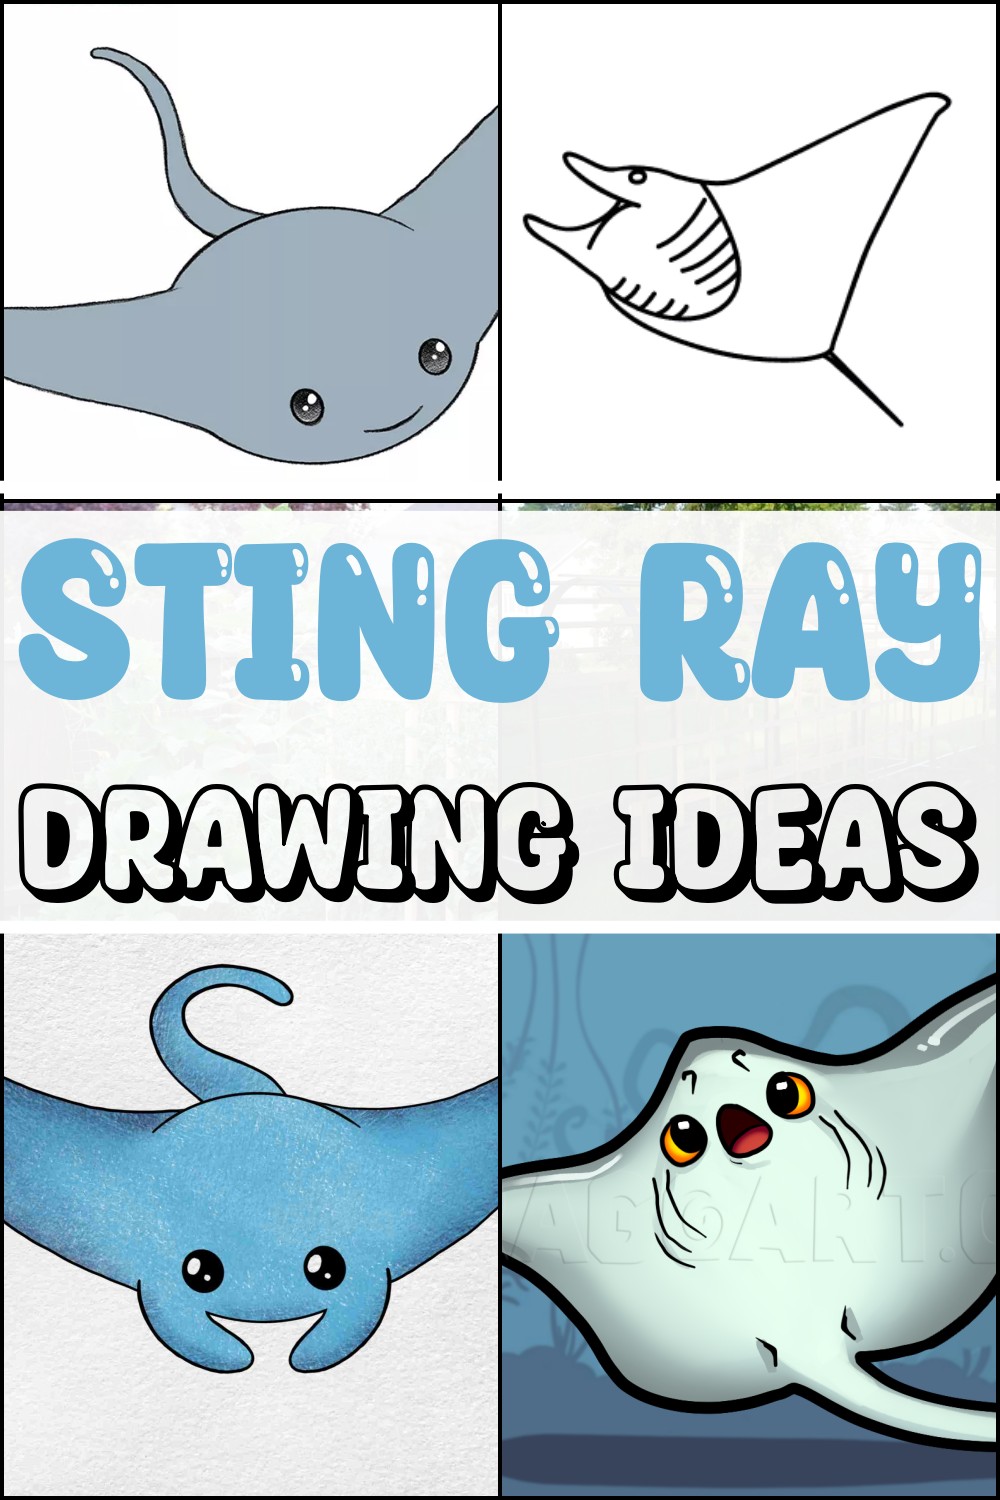 Sting Ray Drawing Ideas